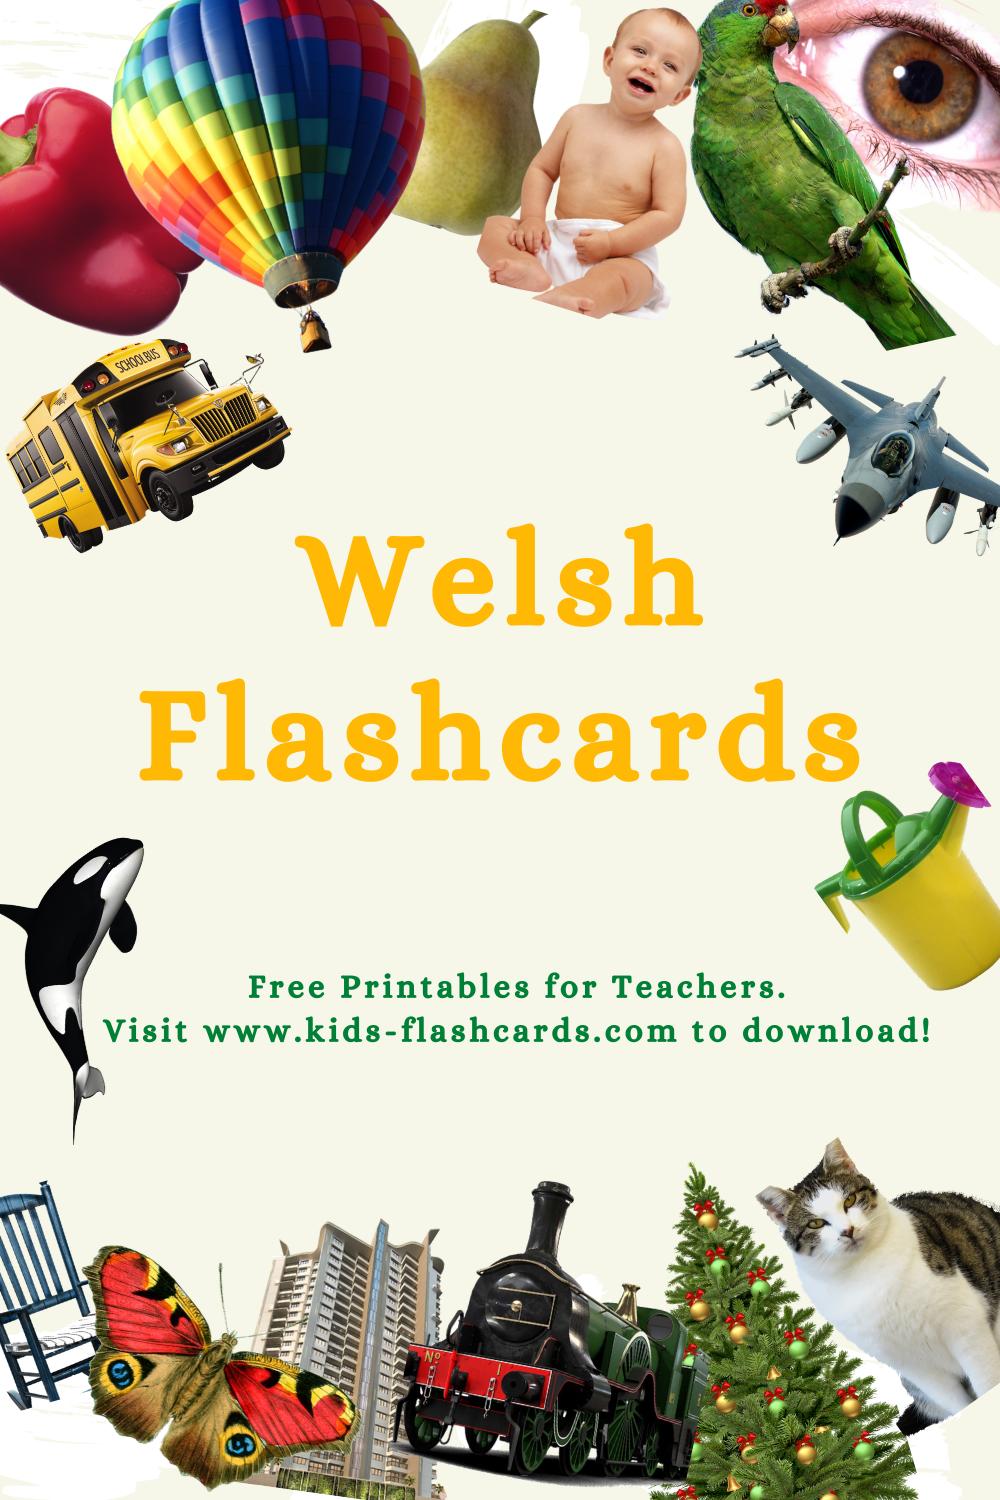 Worksheets to learn Welsh language